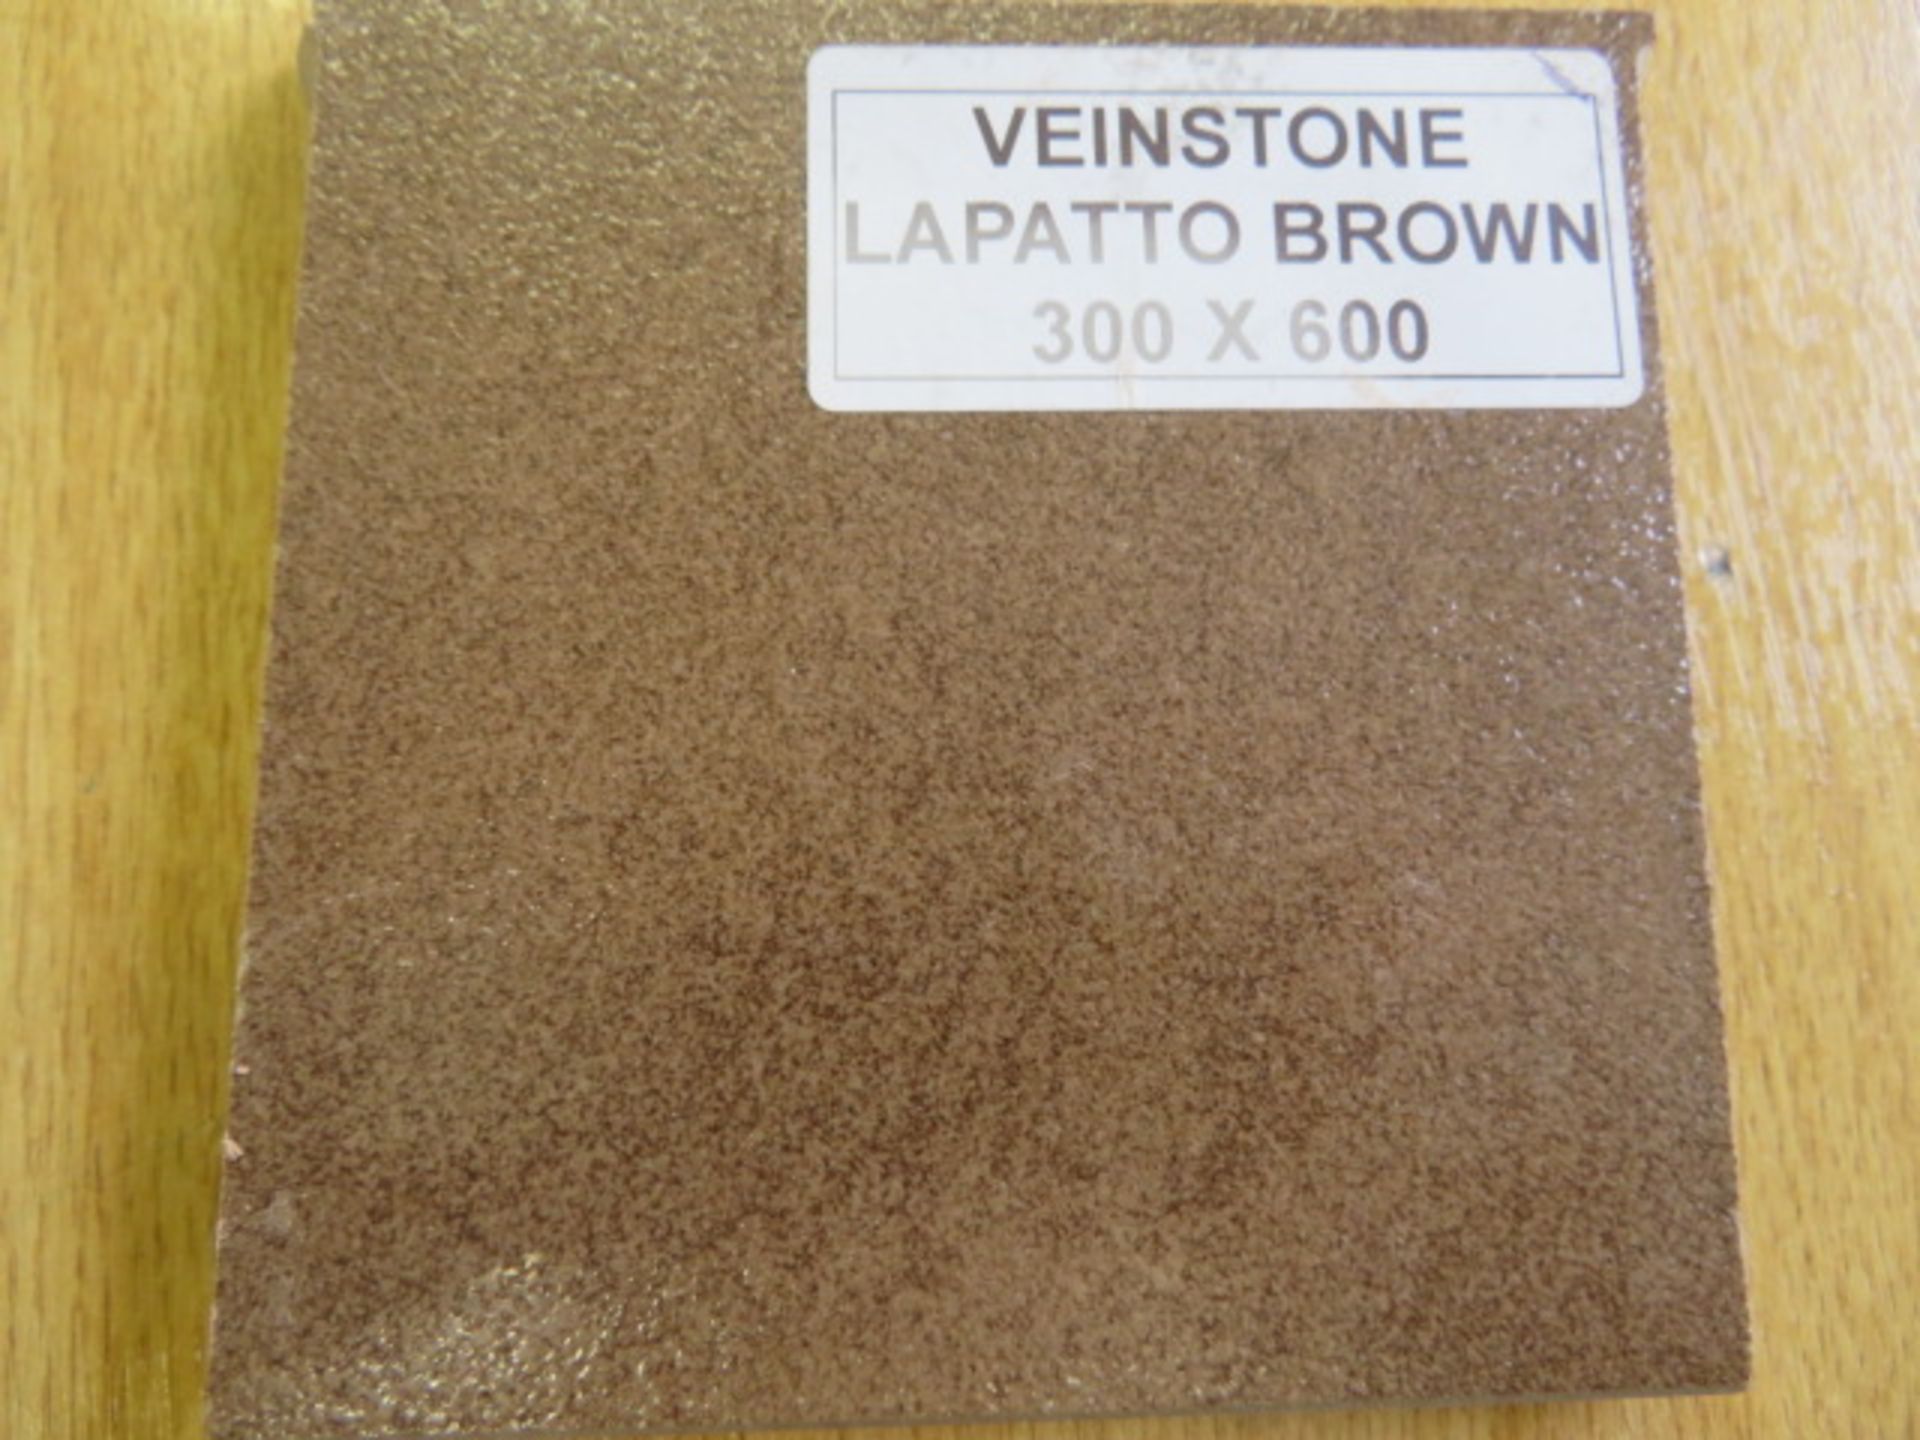 NEW 8.64 Square Meters of Veinstone Lapatto Brown Polished Wall and Floor Tiles. 300x600mm, 1.08m2 - Image 2 of 3